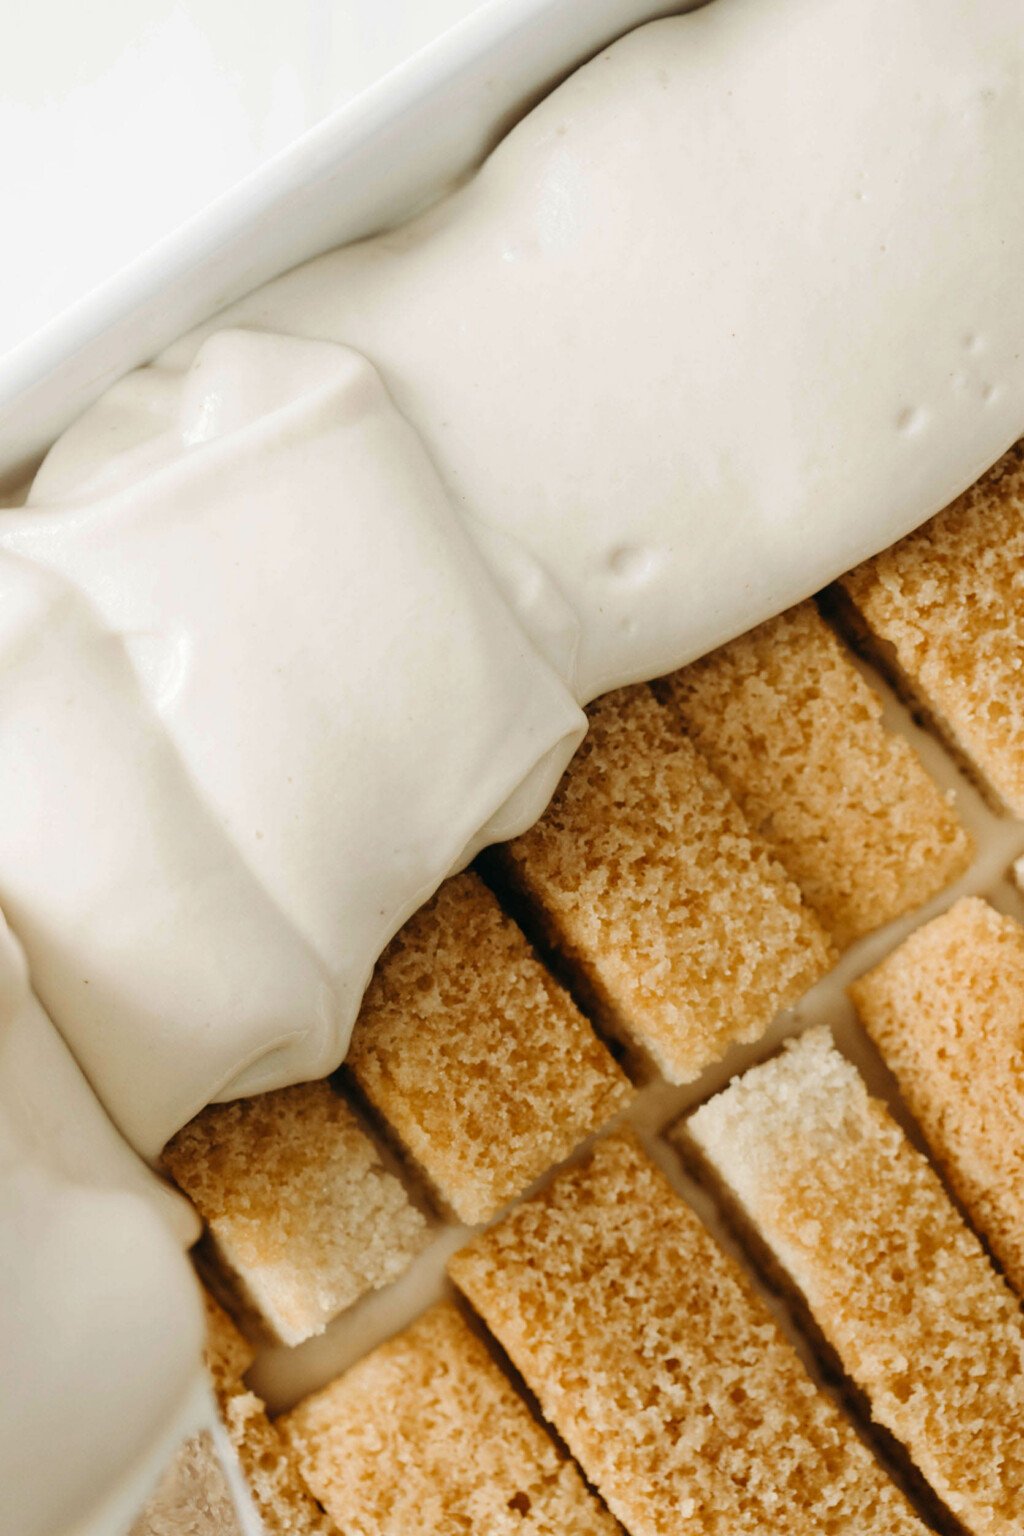 Rectangular slices of vanilla cake are being topped with a layer of a rich, creamy white mixture.